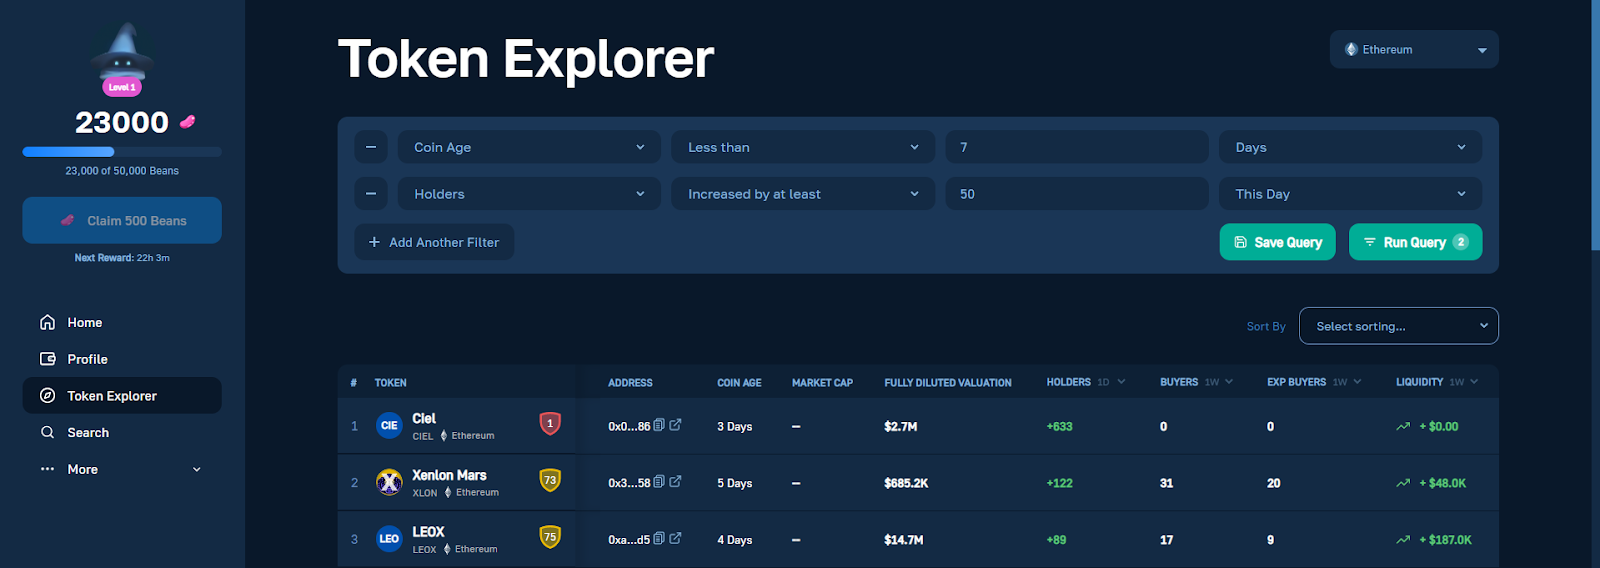 Moralis Money Token Explorer - Holders filter set to 50 new crypto coin holders in the last day